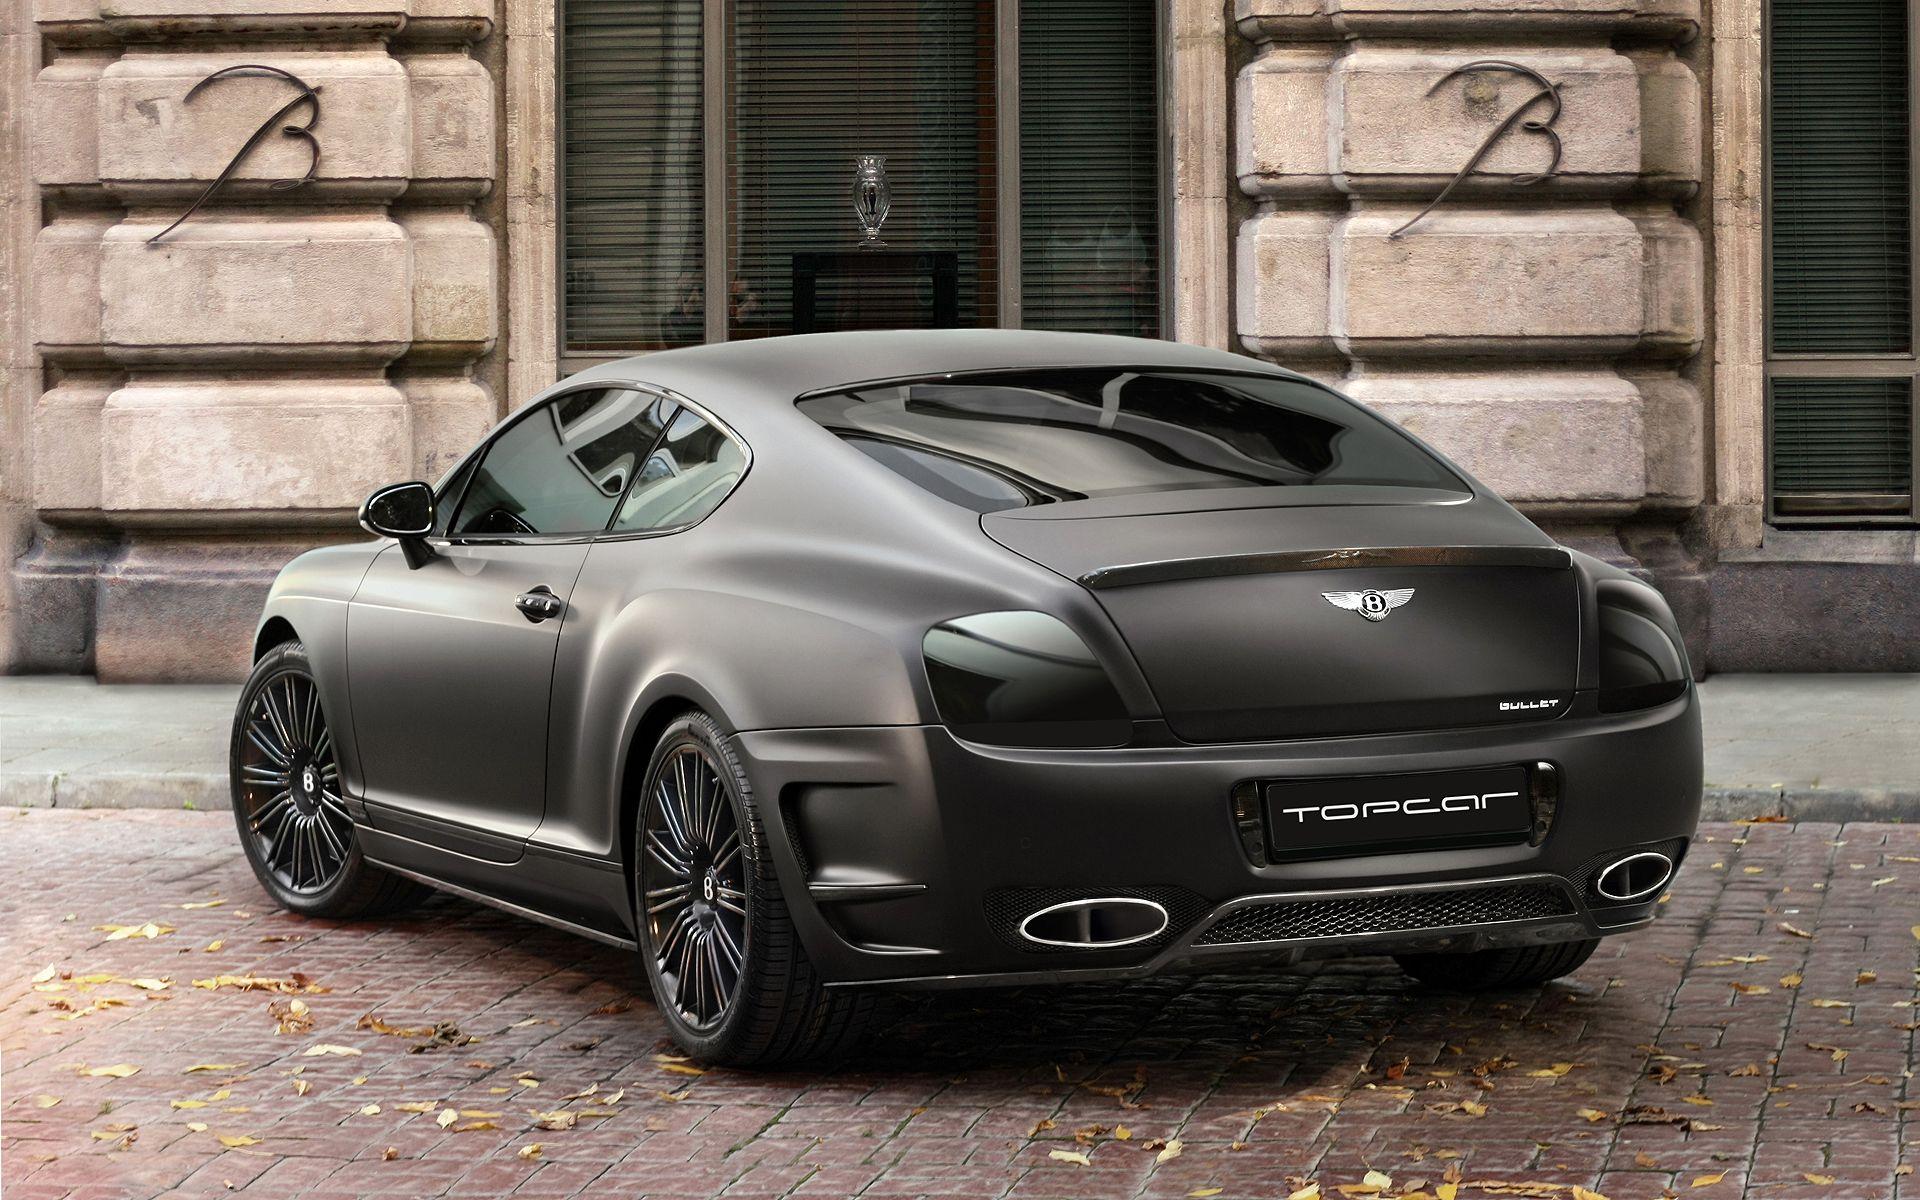 Awesome Bentley HD Wallpaper Free Download